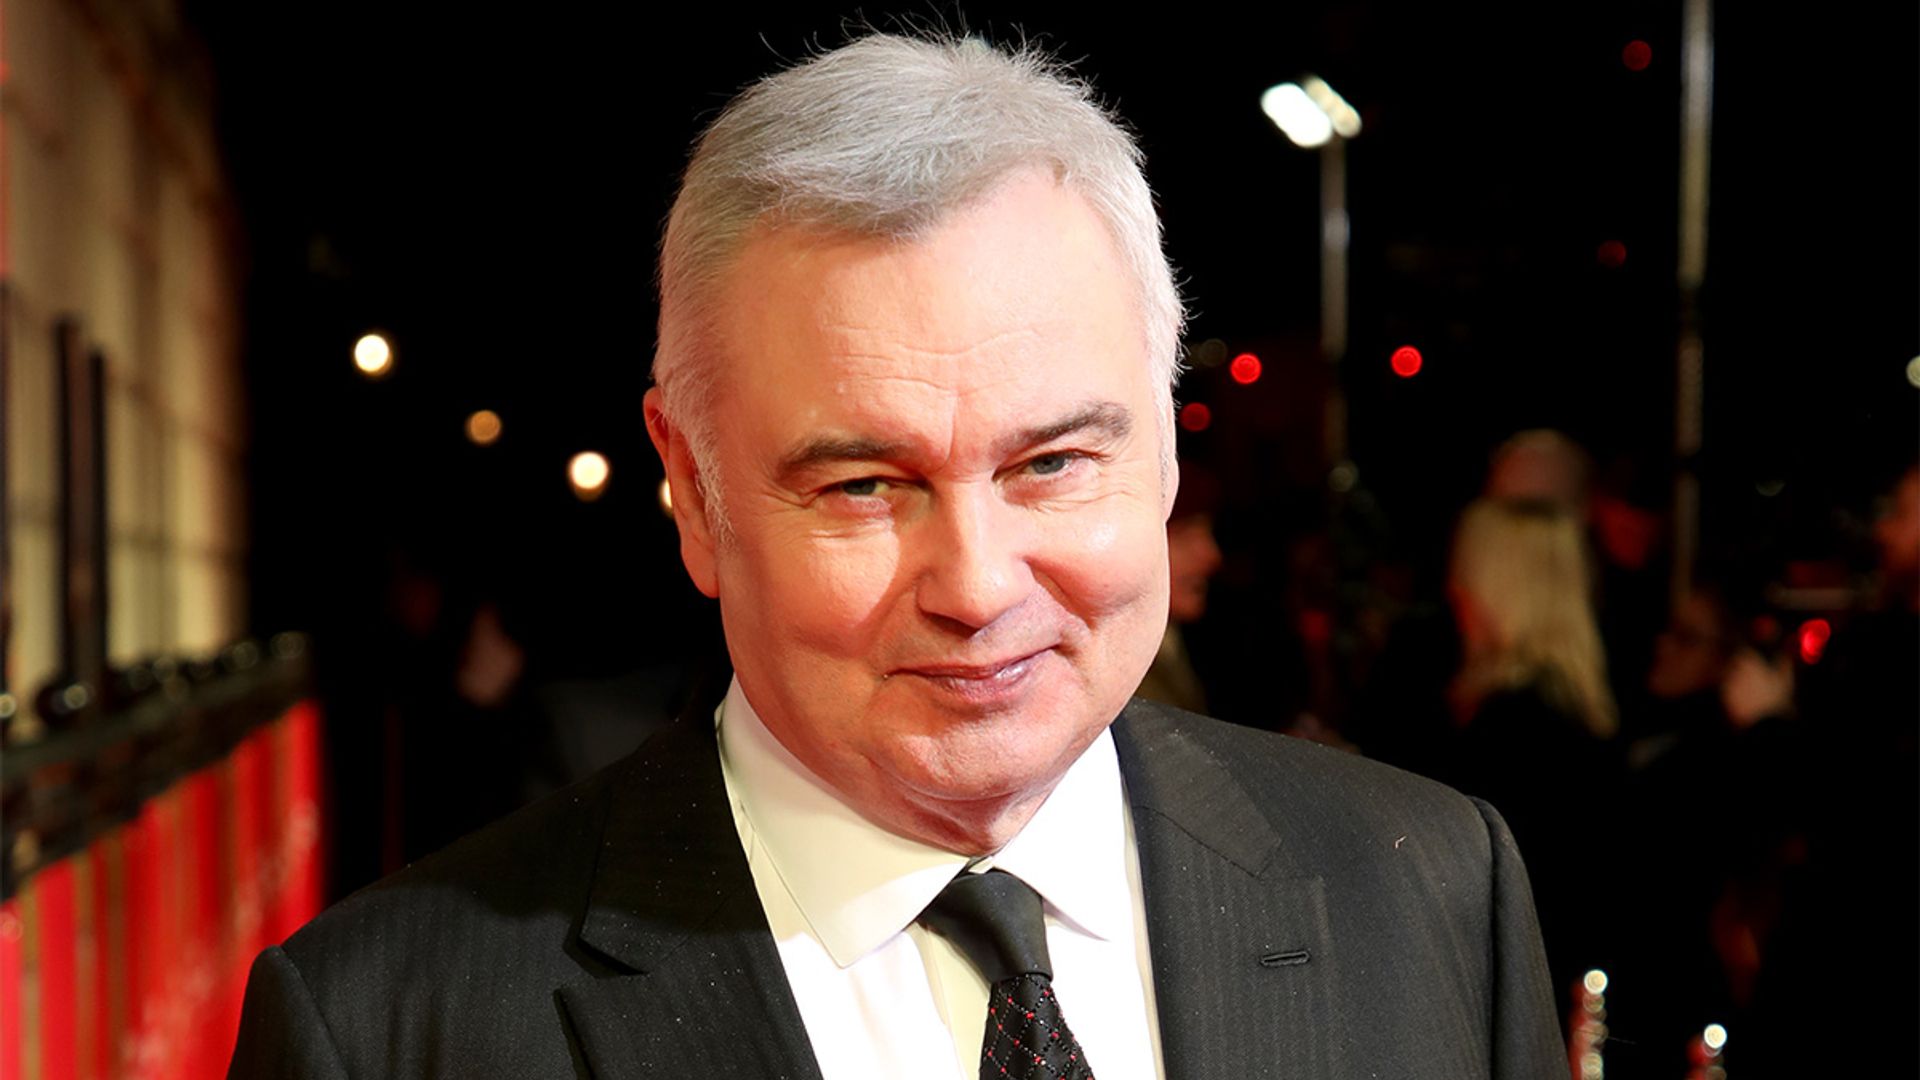 Eamonn Holmes surprises fans with last minute This Morning news